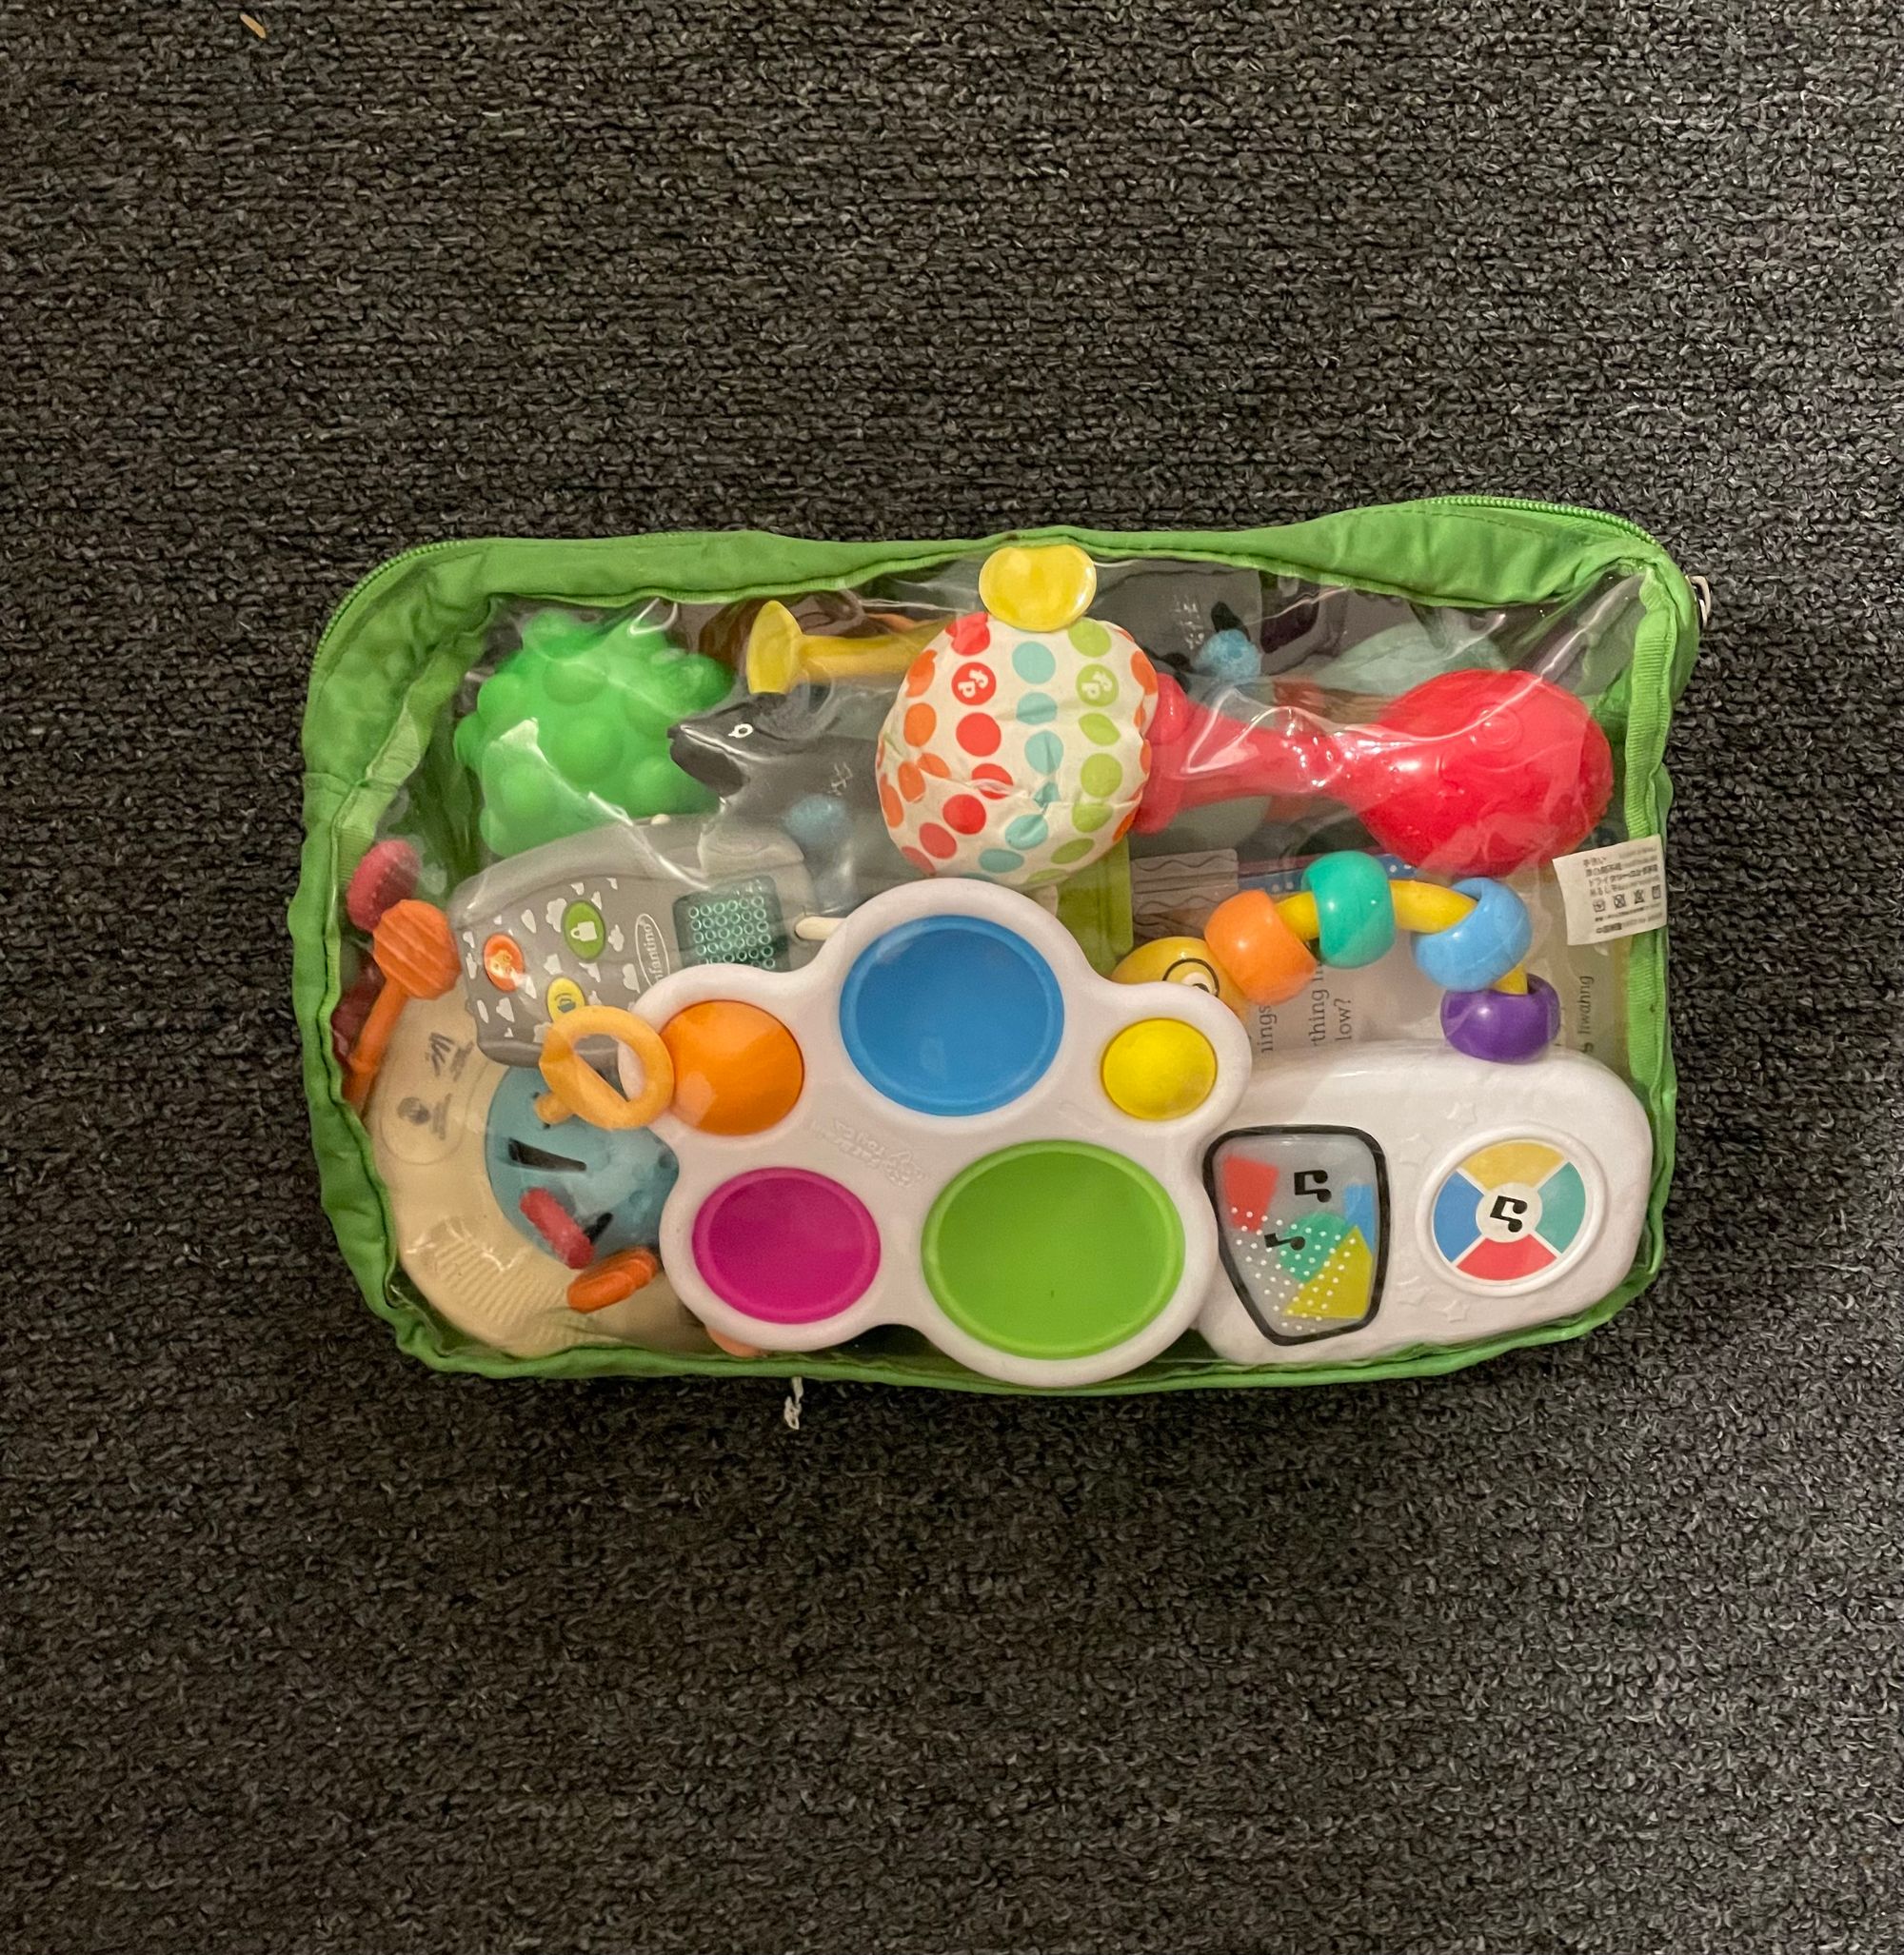 Bag of toys for traveling with an infant